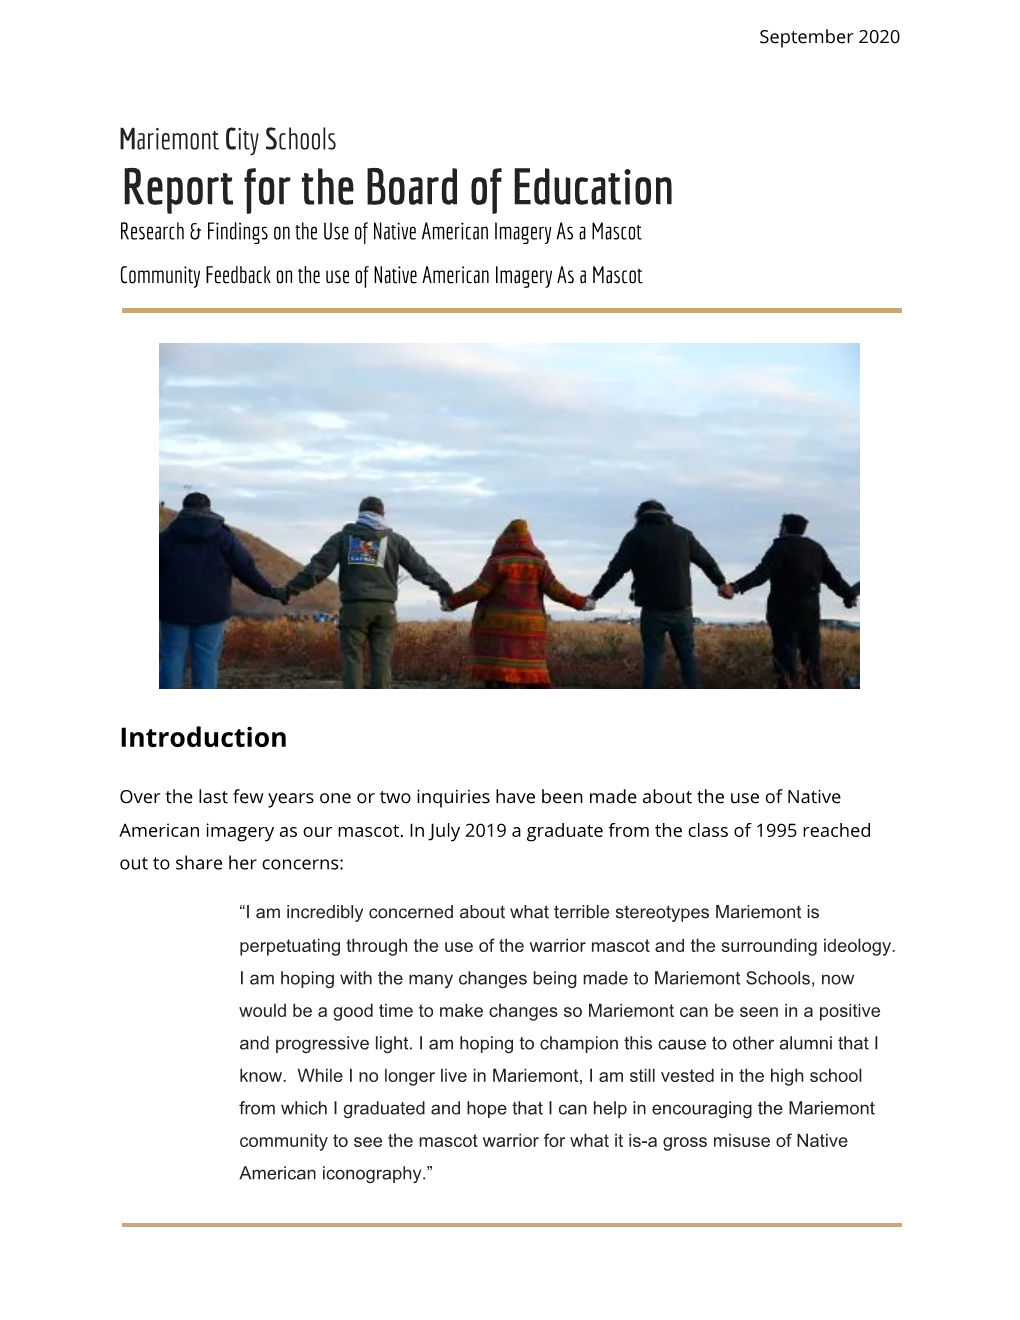 Report for the Board of Education Research & Findings on the Use of Native American Imagery As a Mascot